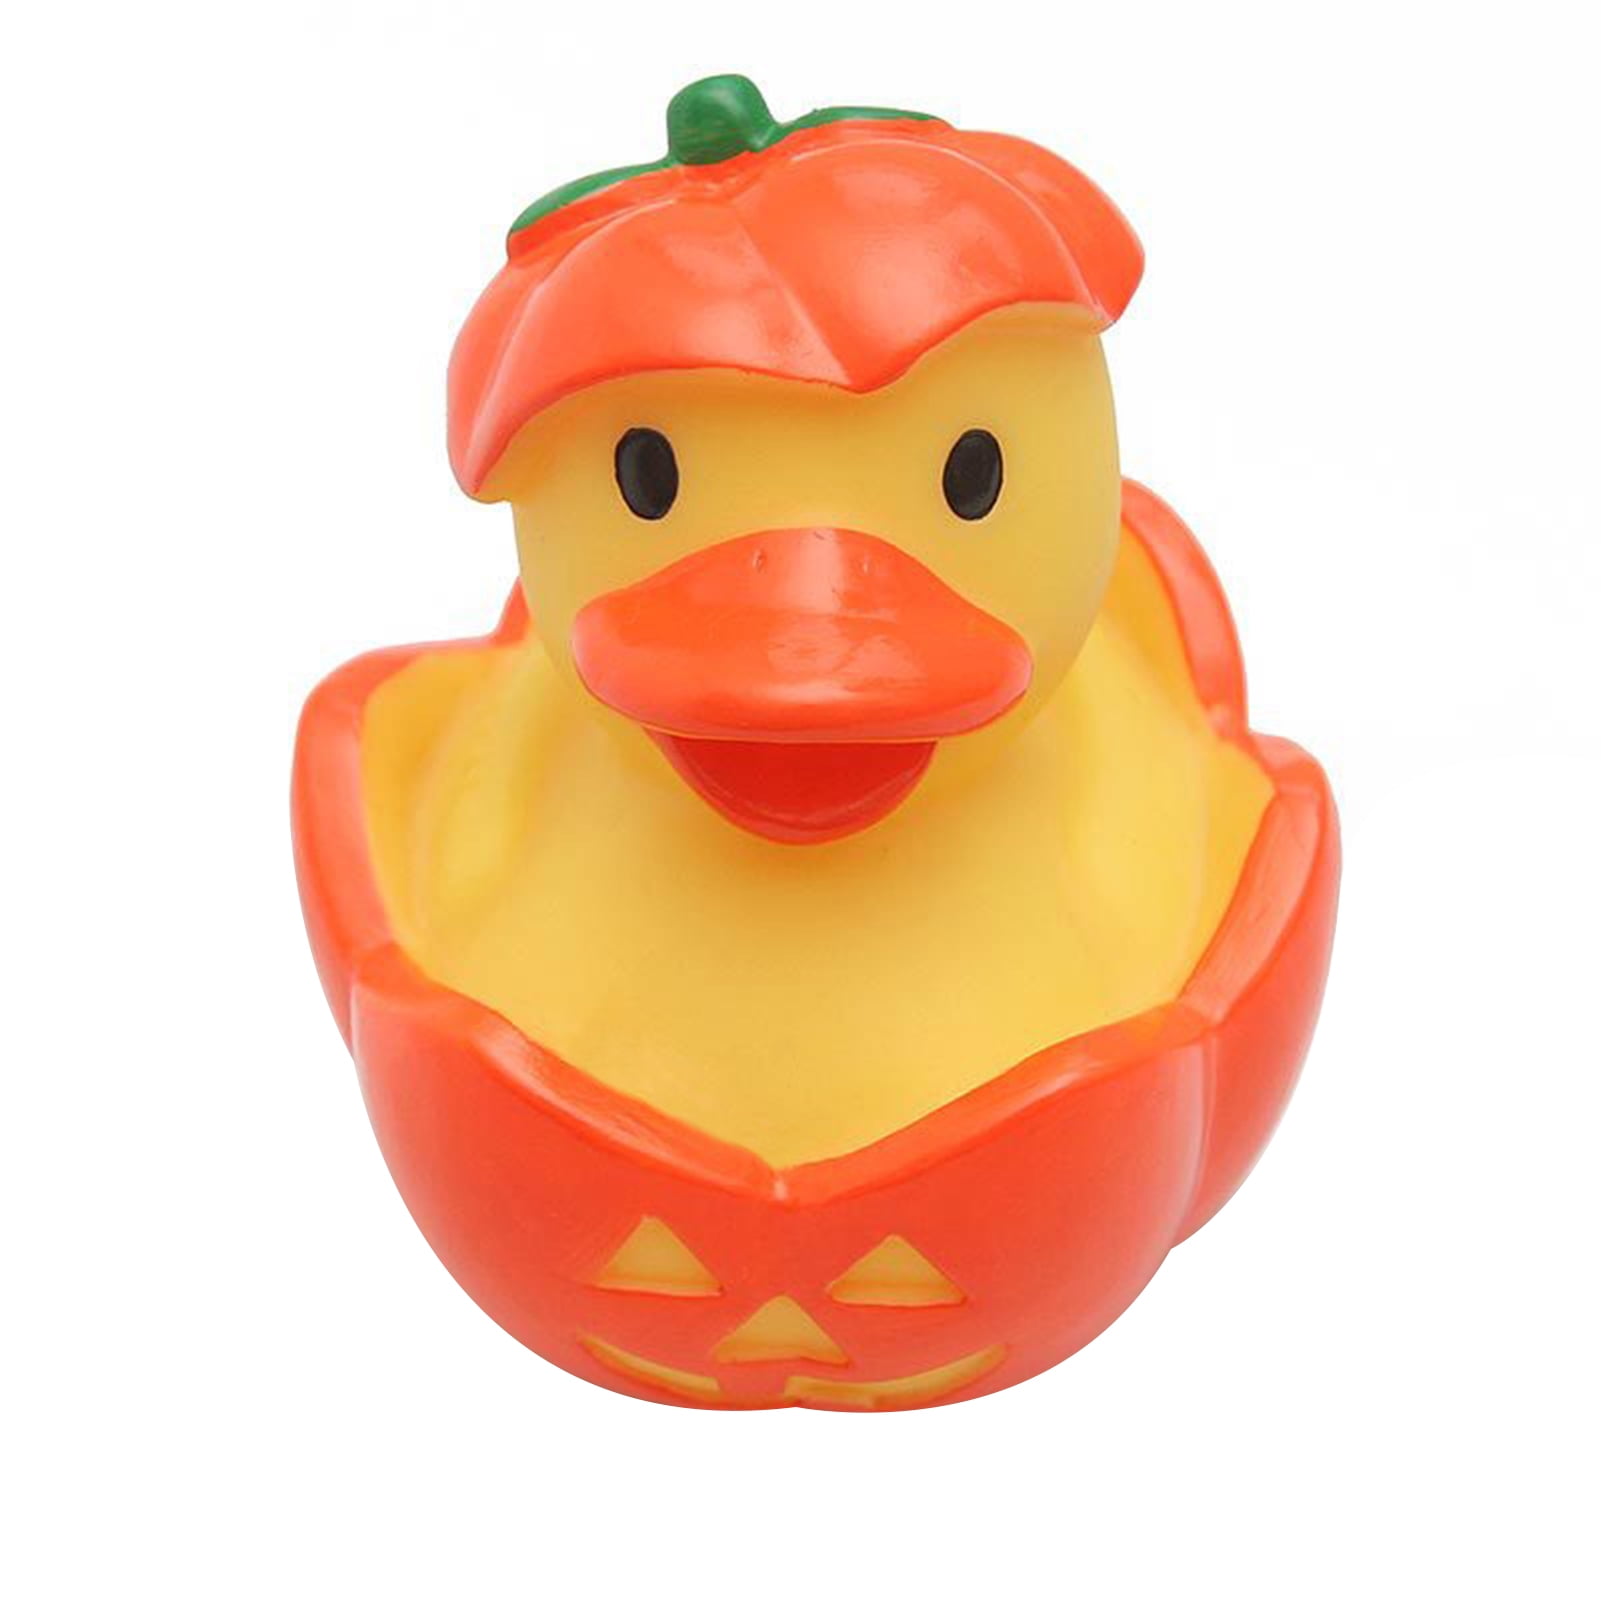 Floating Bath Time Toy for Children Duck Race Christmas Plastic RUBBER DUCK 